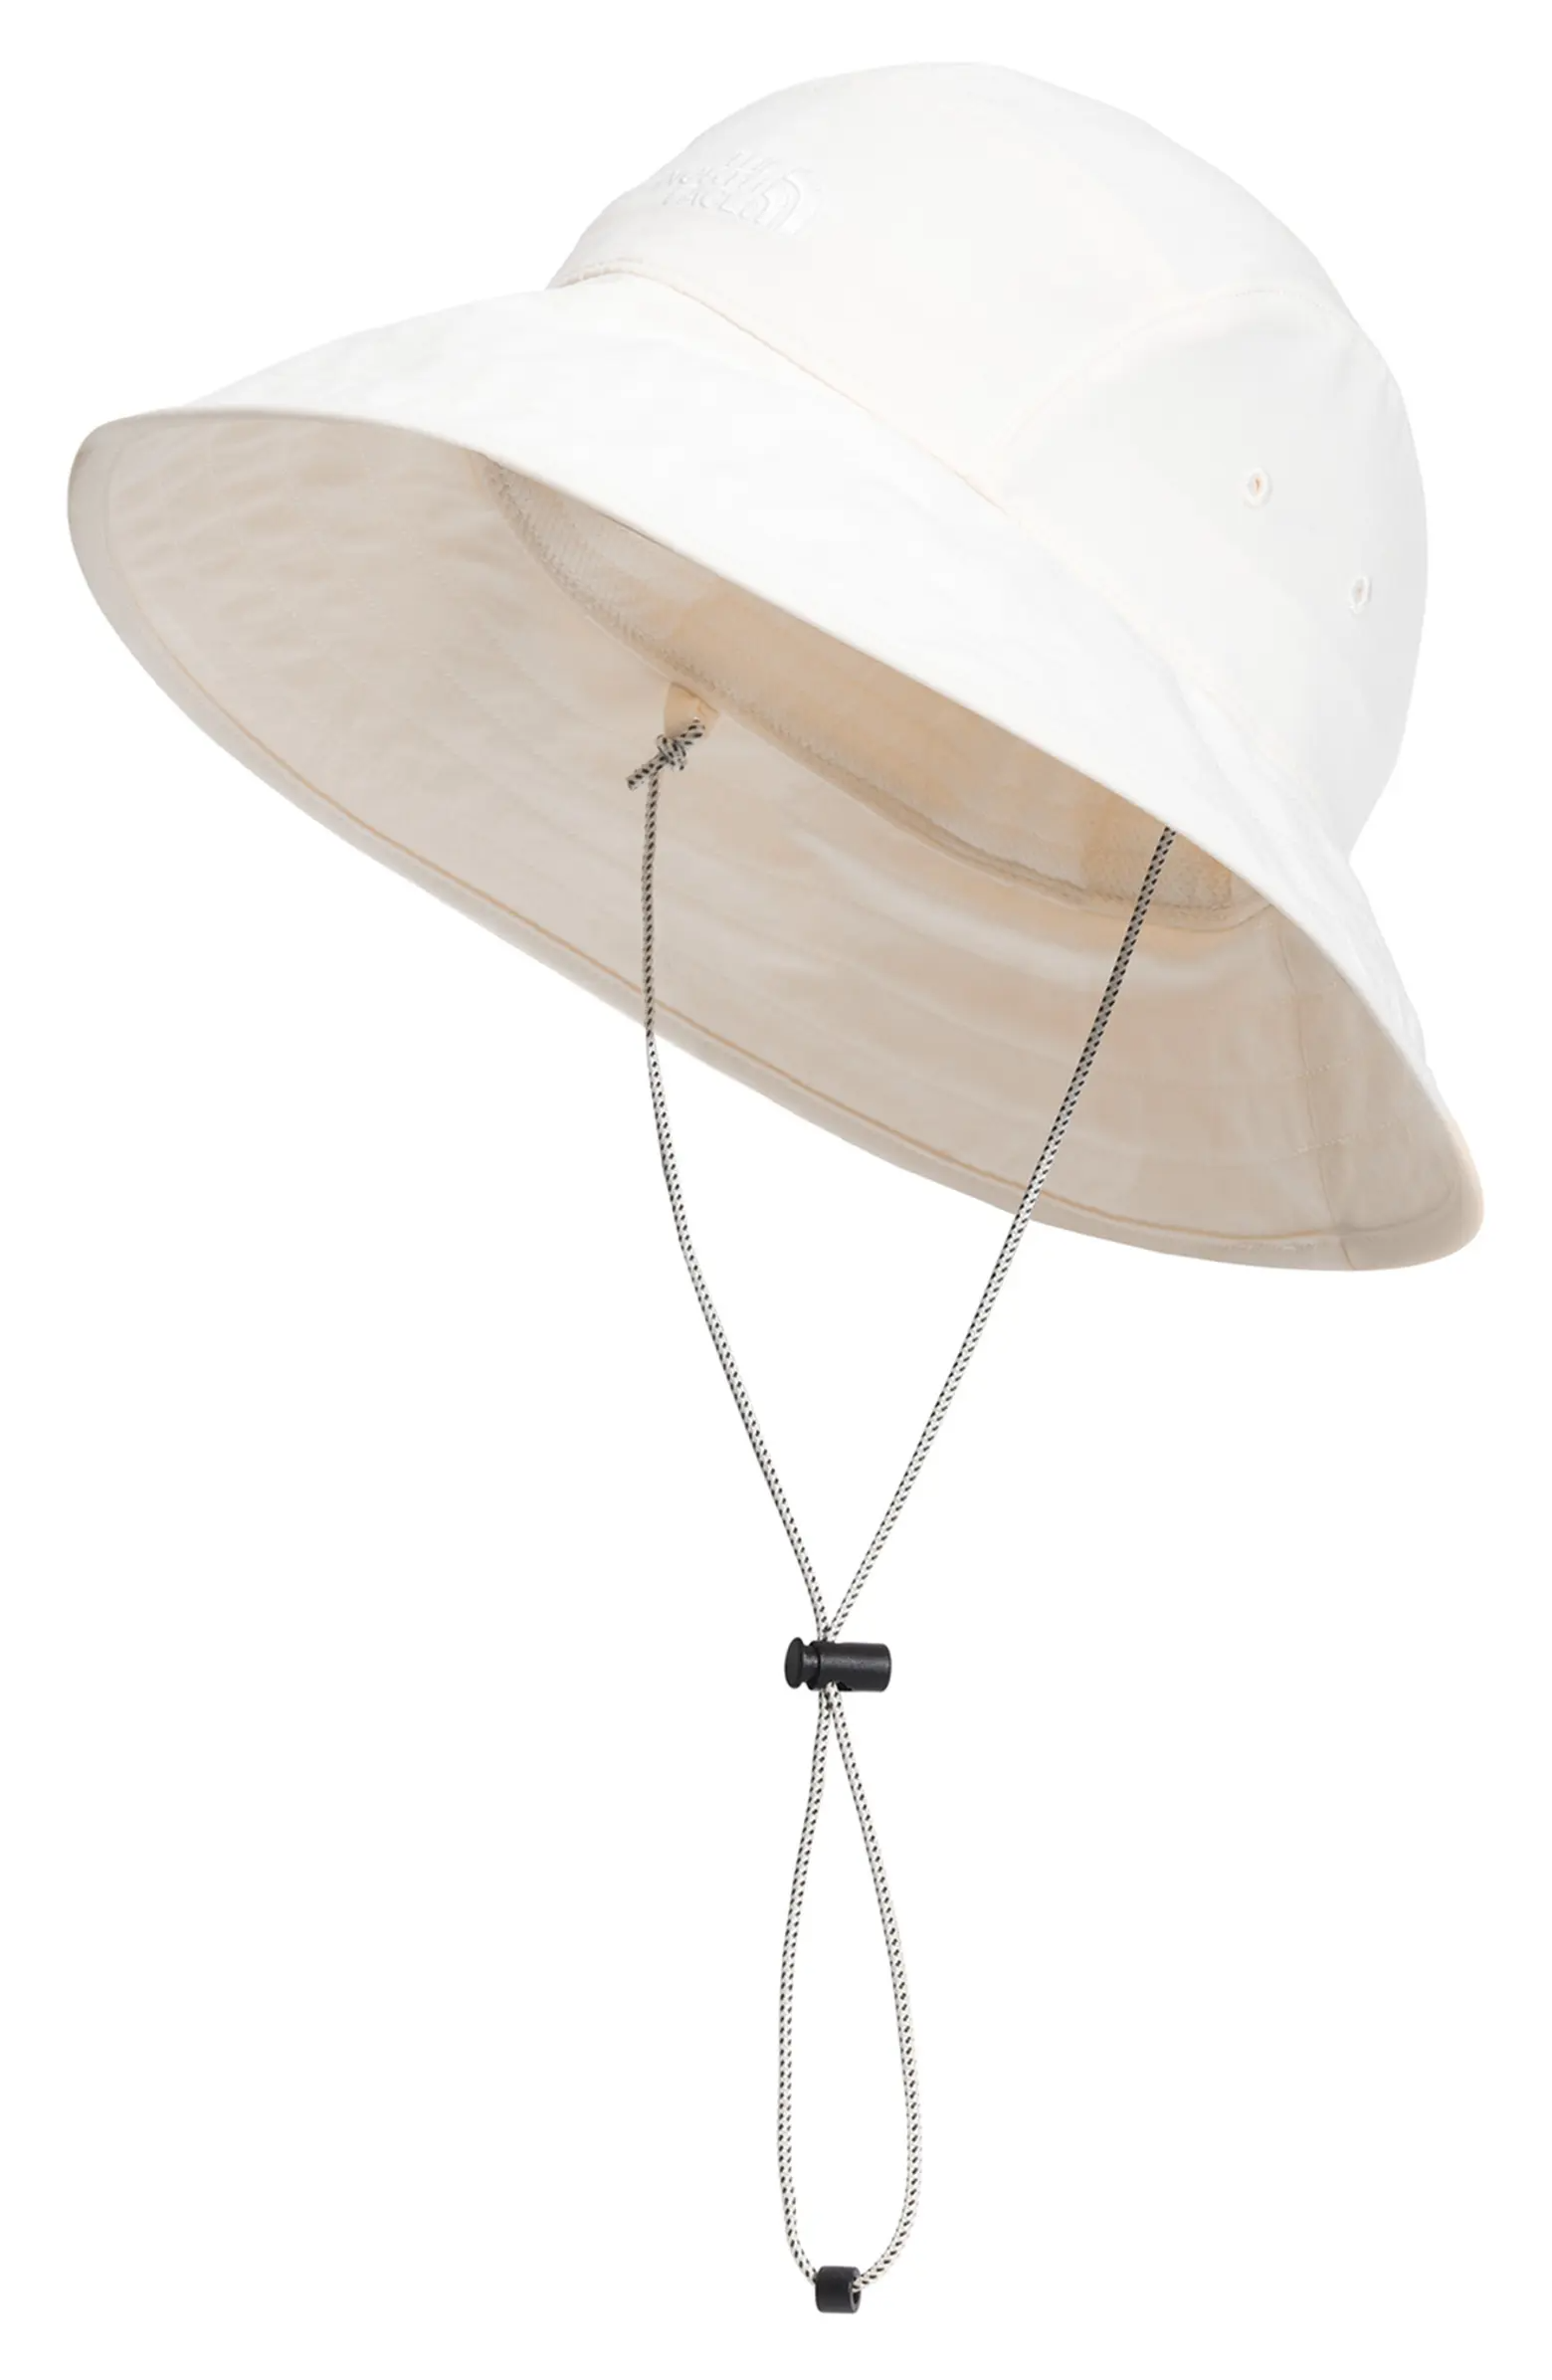 The North Face + Class V Brimmer Sun Hat